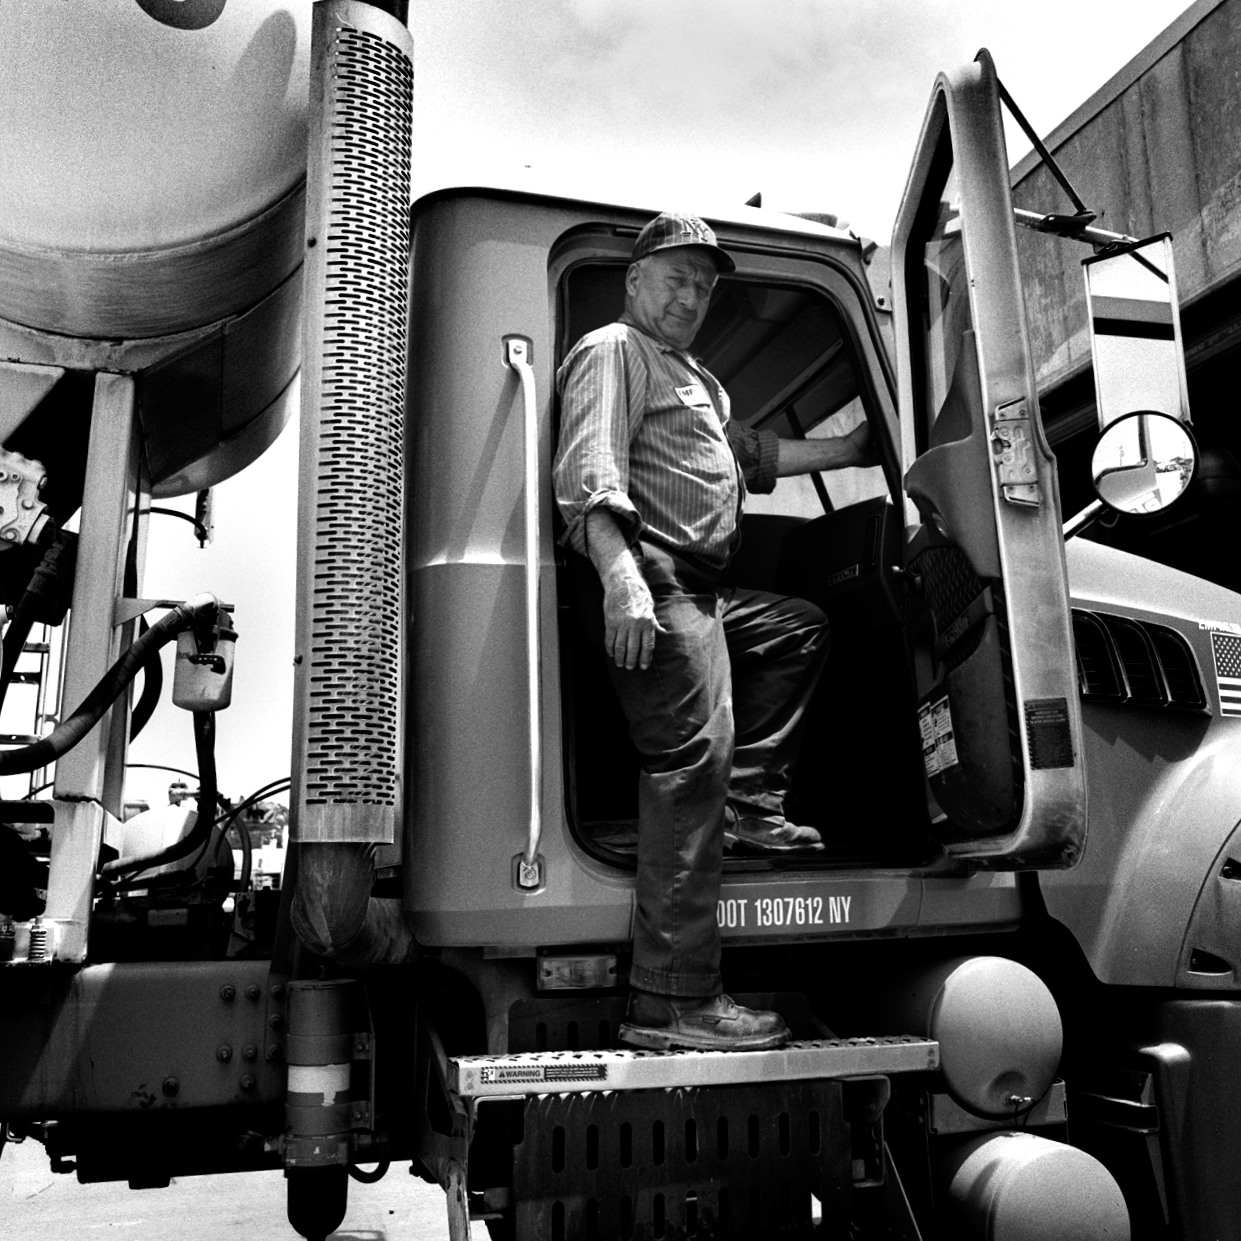  Andrew Kruzzkowski, standing in one of the trucks he has helped maintain as a mechanic for Empire Cement for over 35 years since coming to America from Poland.  Williamsburg, Brooklyn, NY (July 2016) 